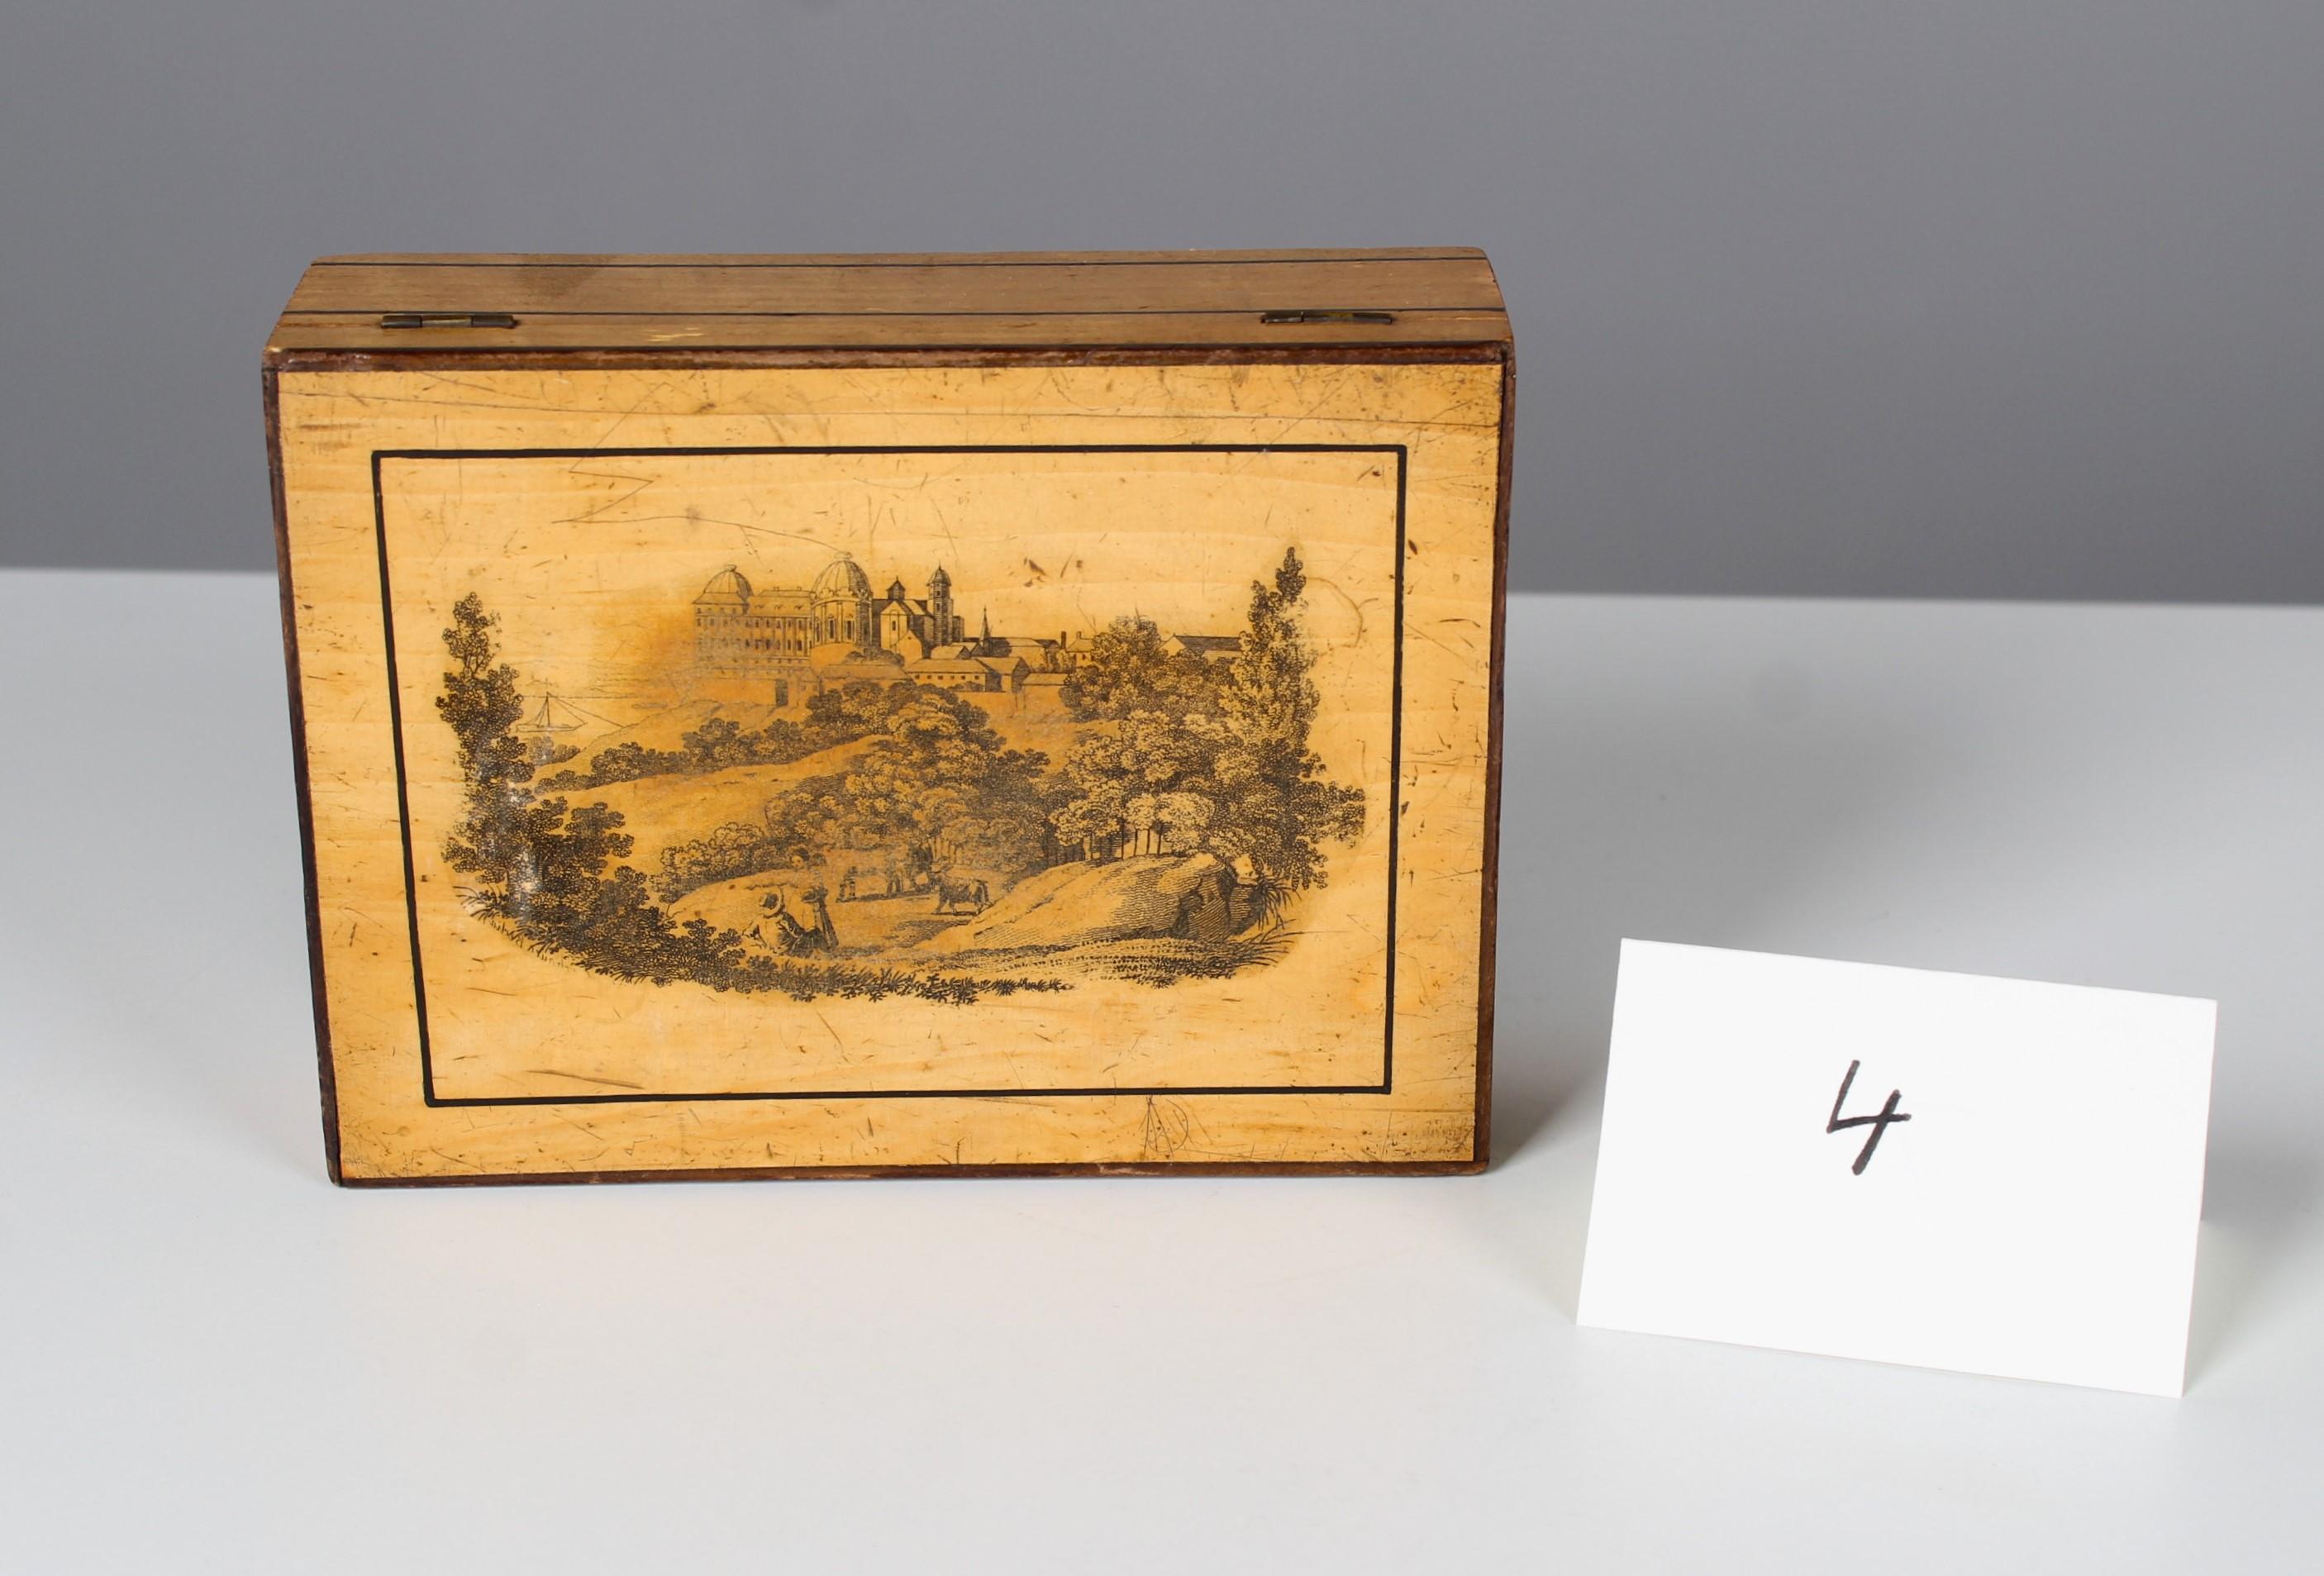 Antique Wood Box With Transfer Print Technique, Around 1900 For Sale 2